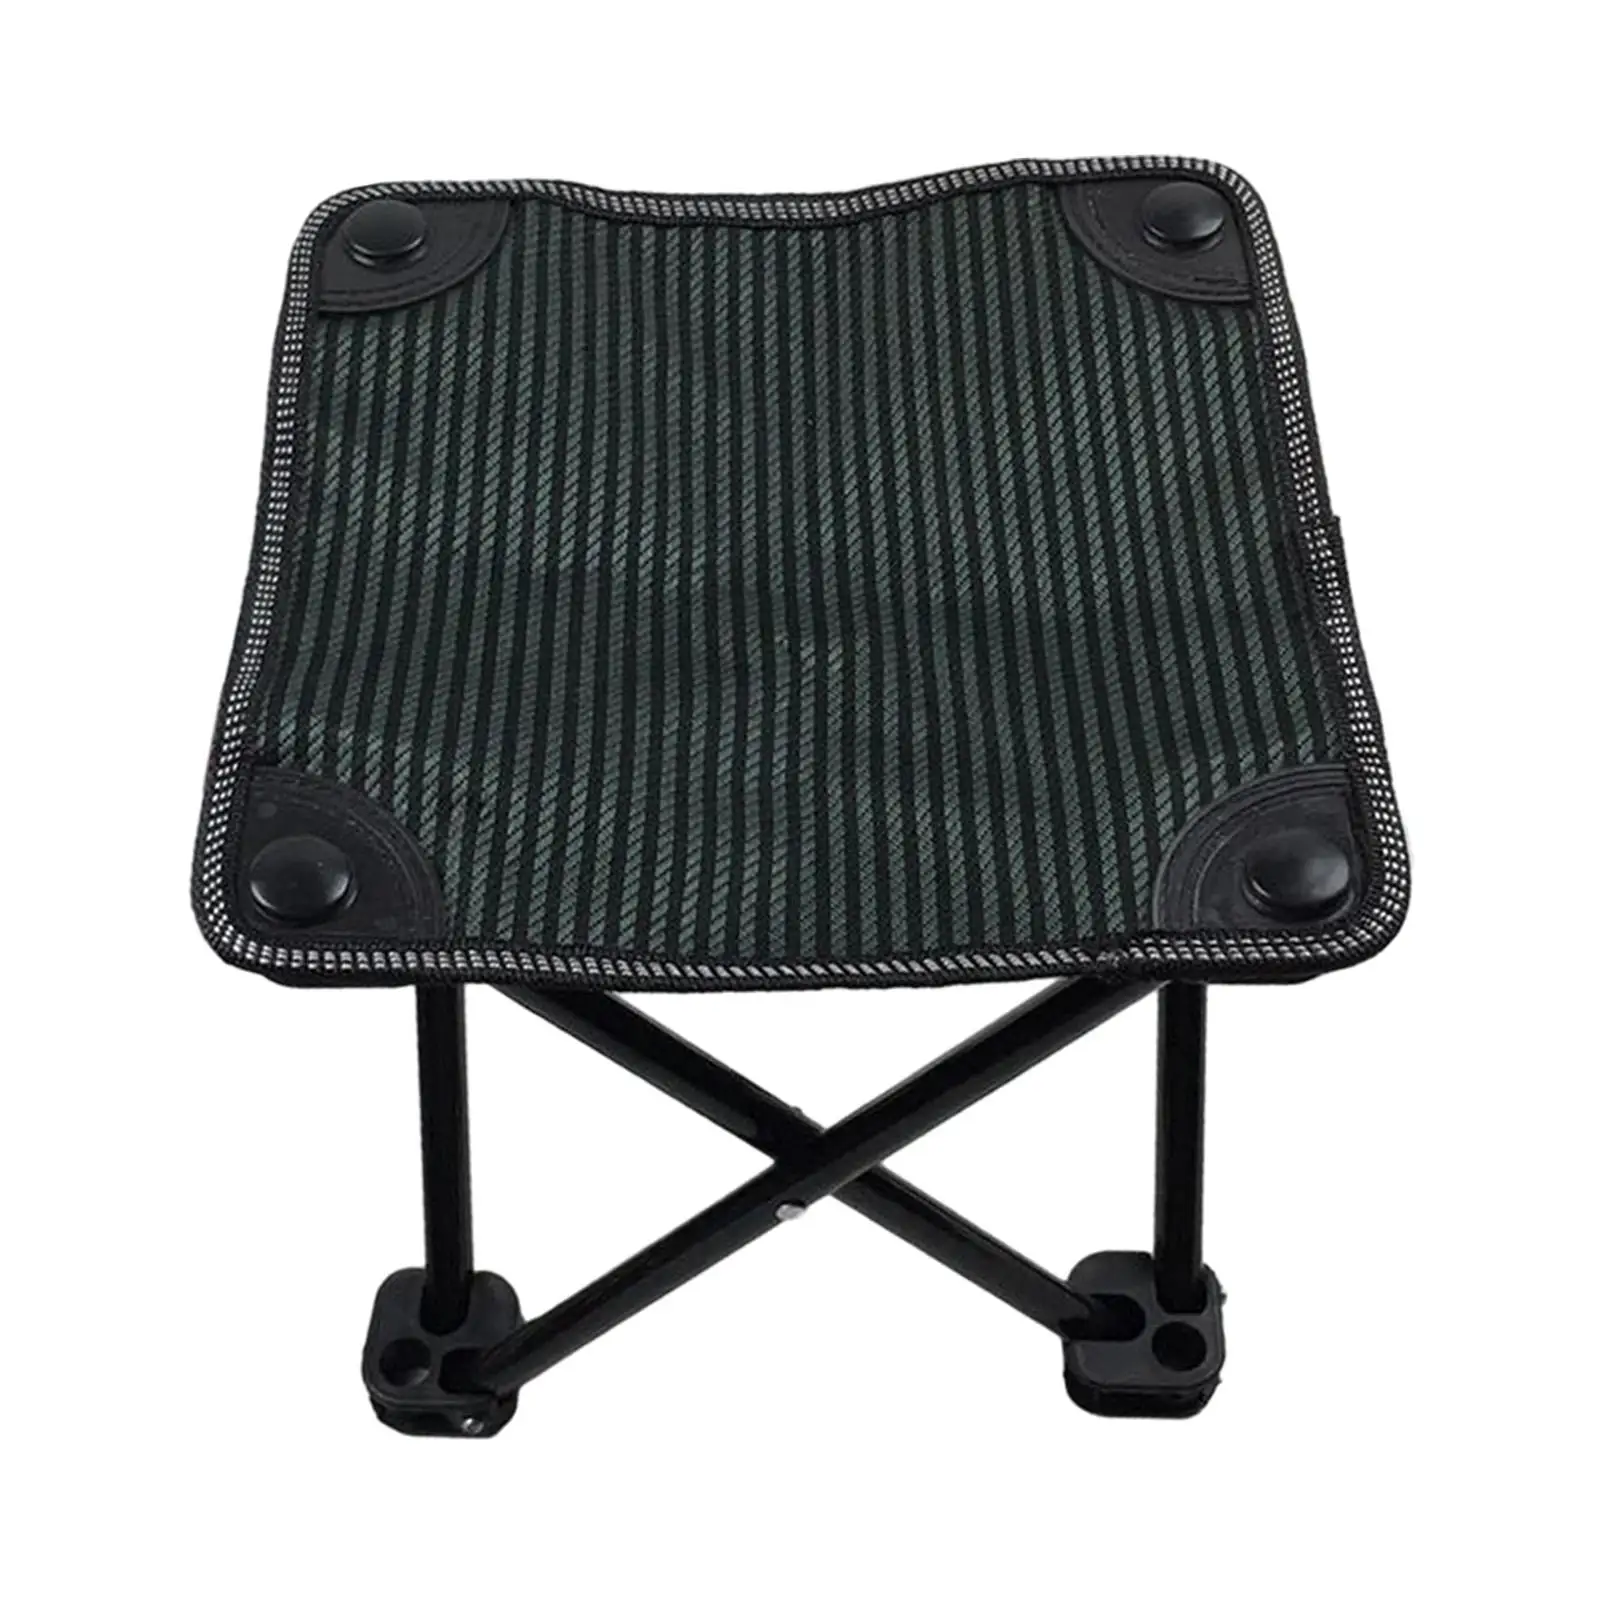 Camping Folding Stool Foot Rest under Desk Footstool Compact Footstool Saddle Chair for Garden Outdoor Picnic Fishing Traveling